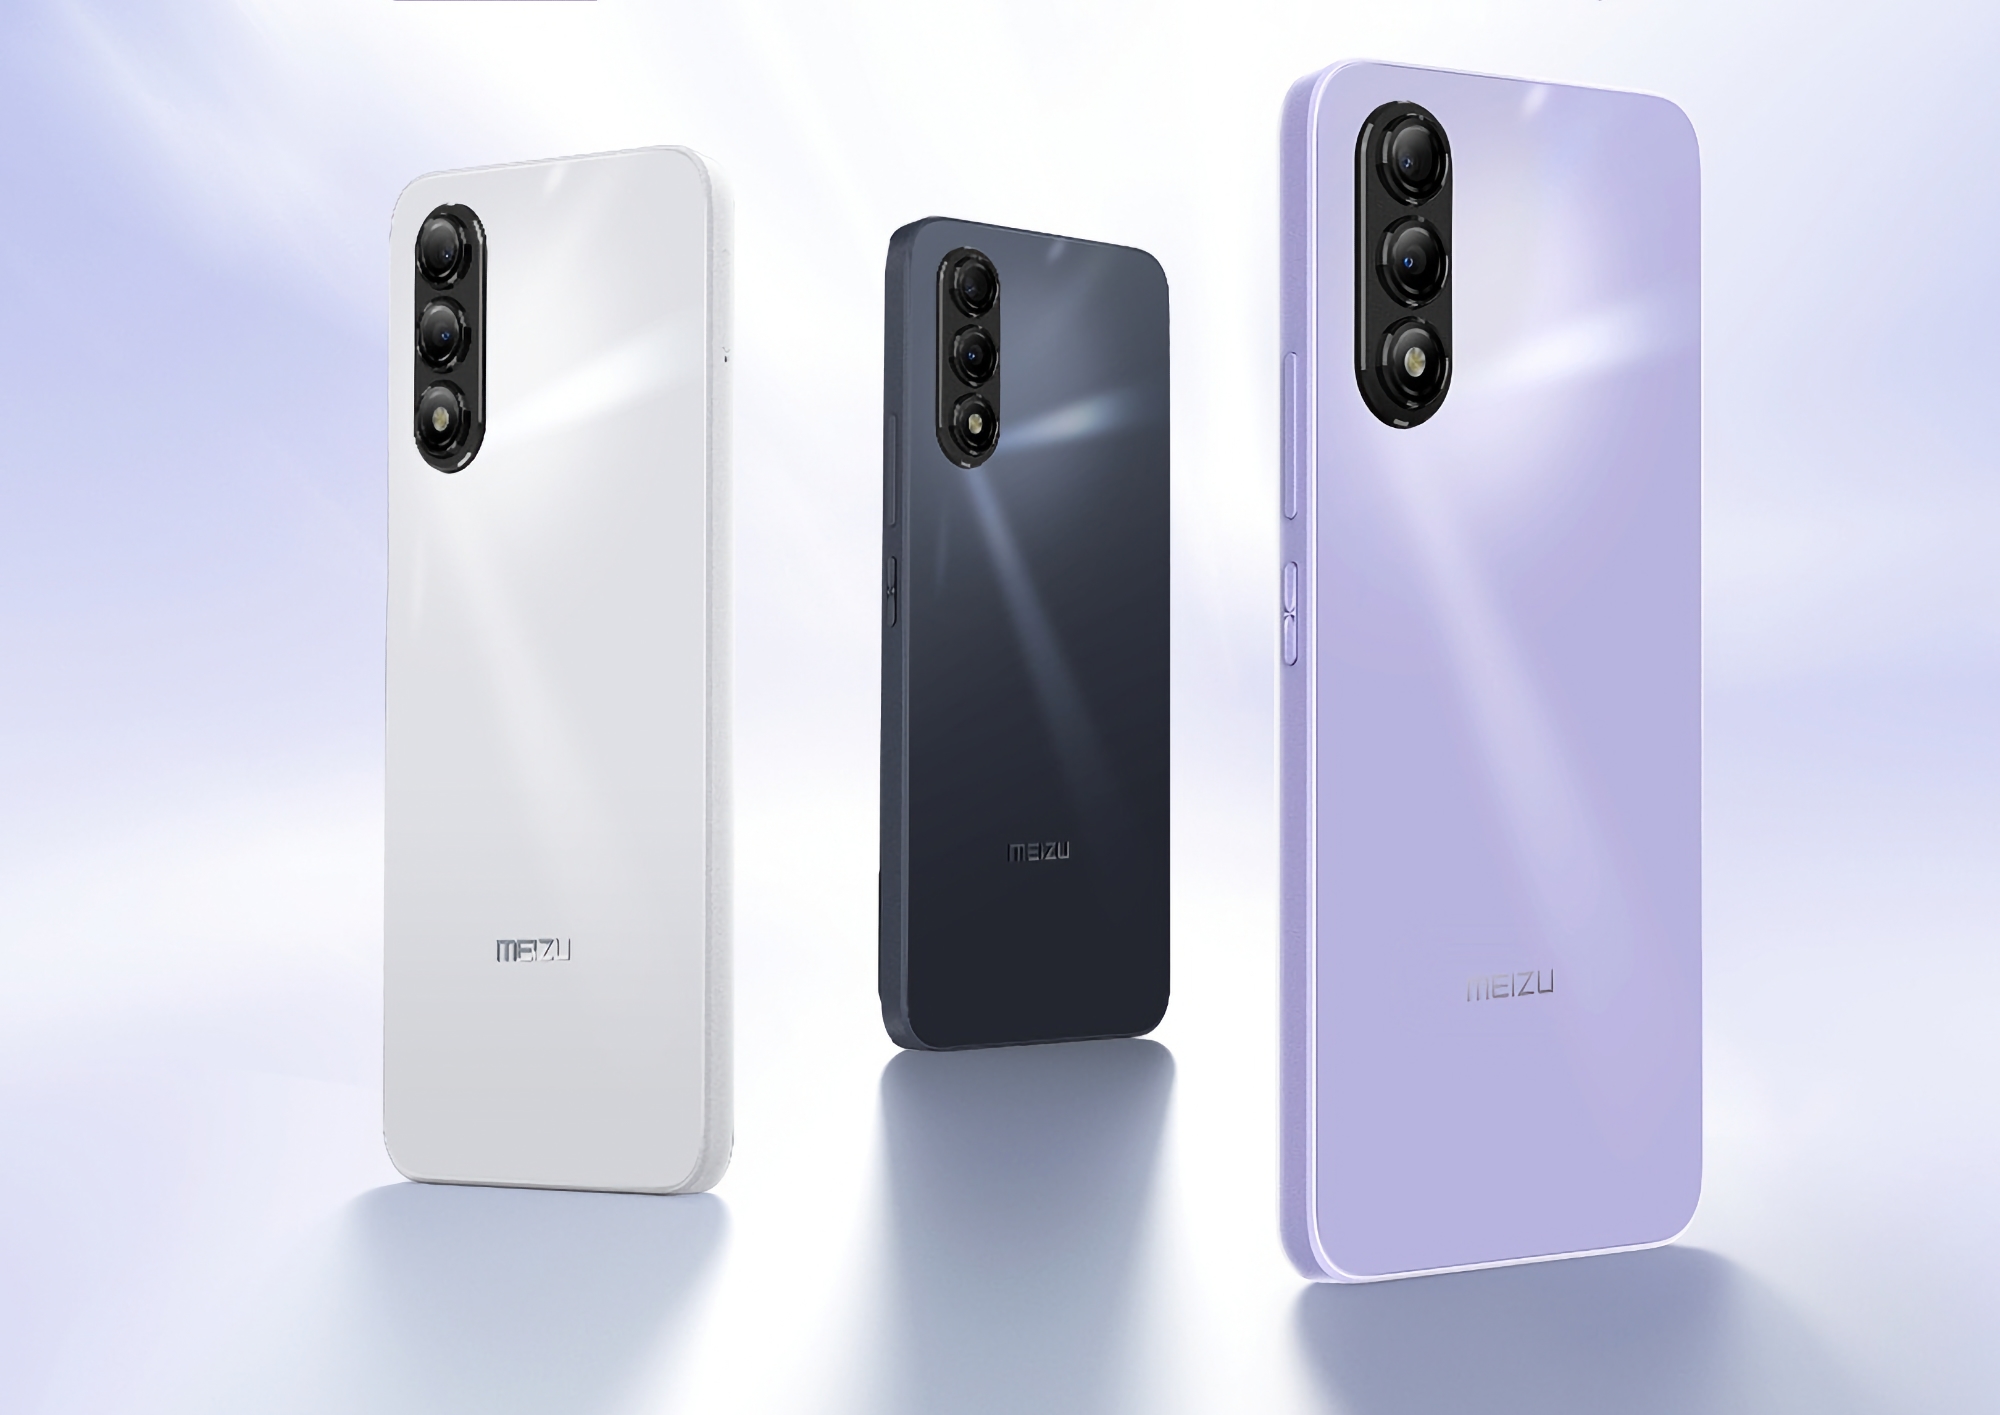 Meizu is preparing to release the Blue 20: a smartphone with AI features, 90Hz LCD display and 5010mAh battery for $140